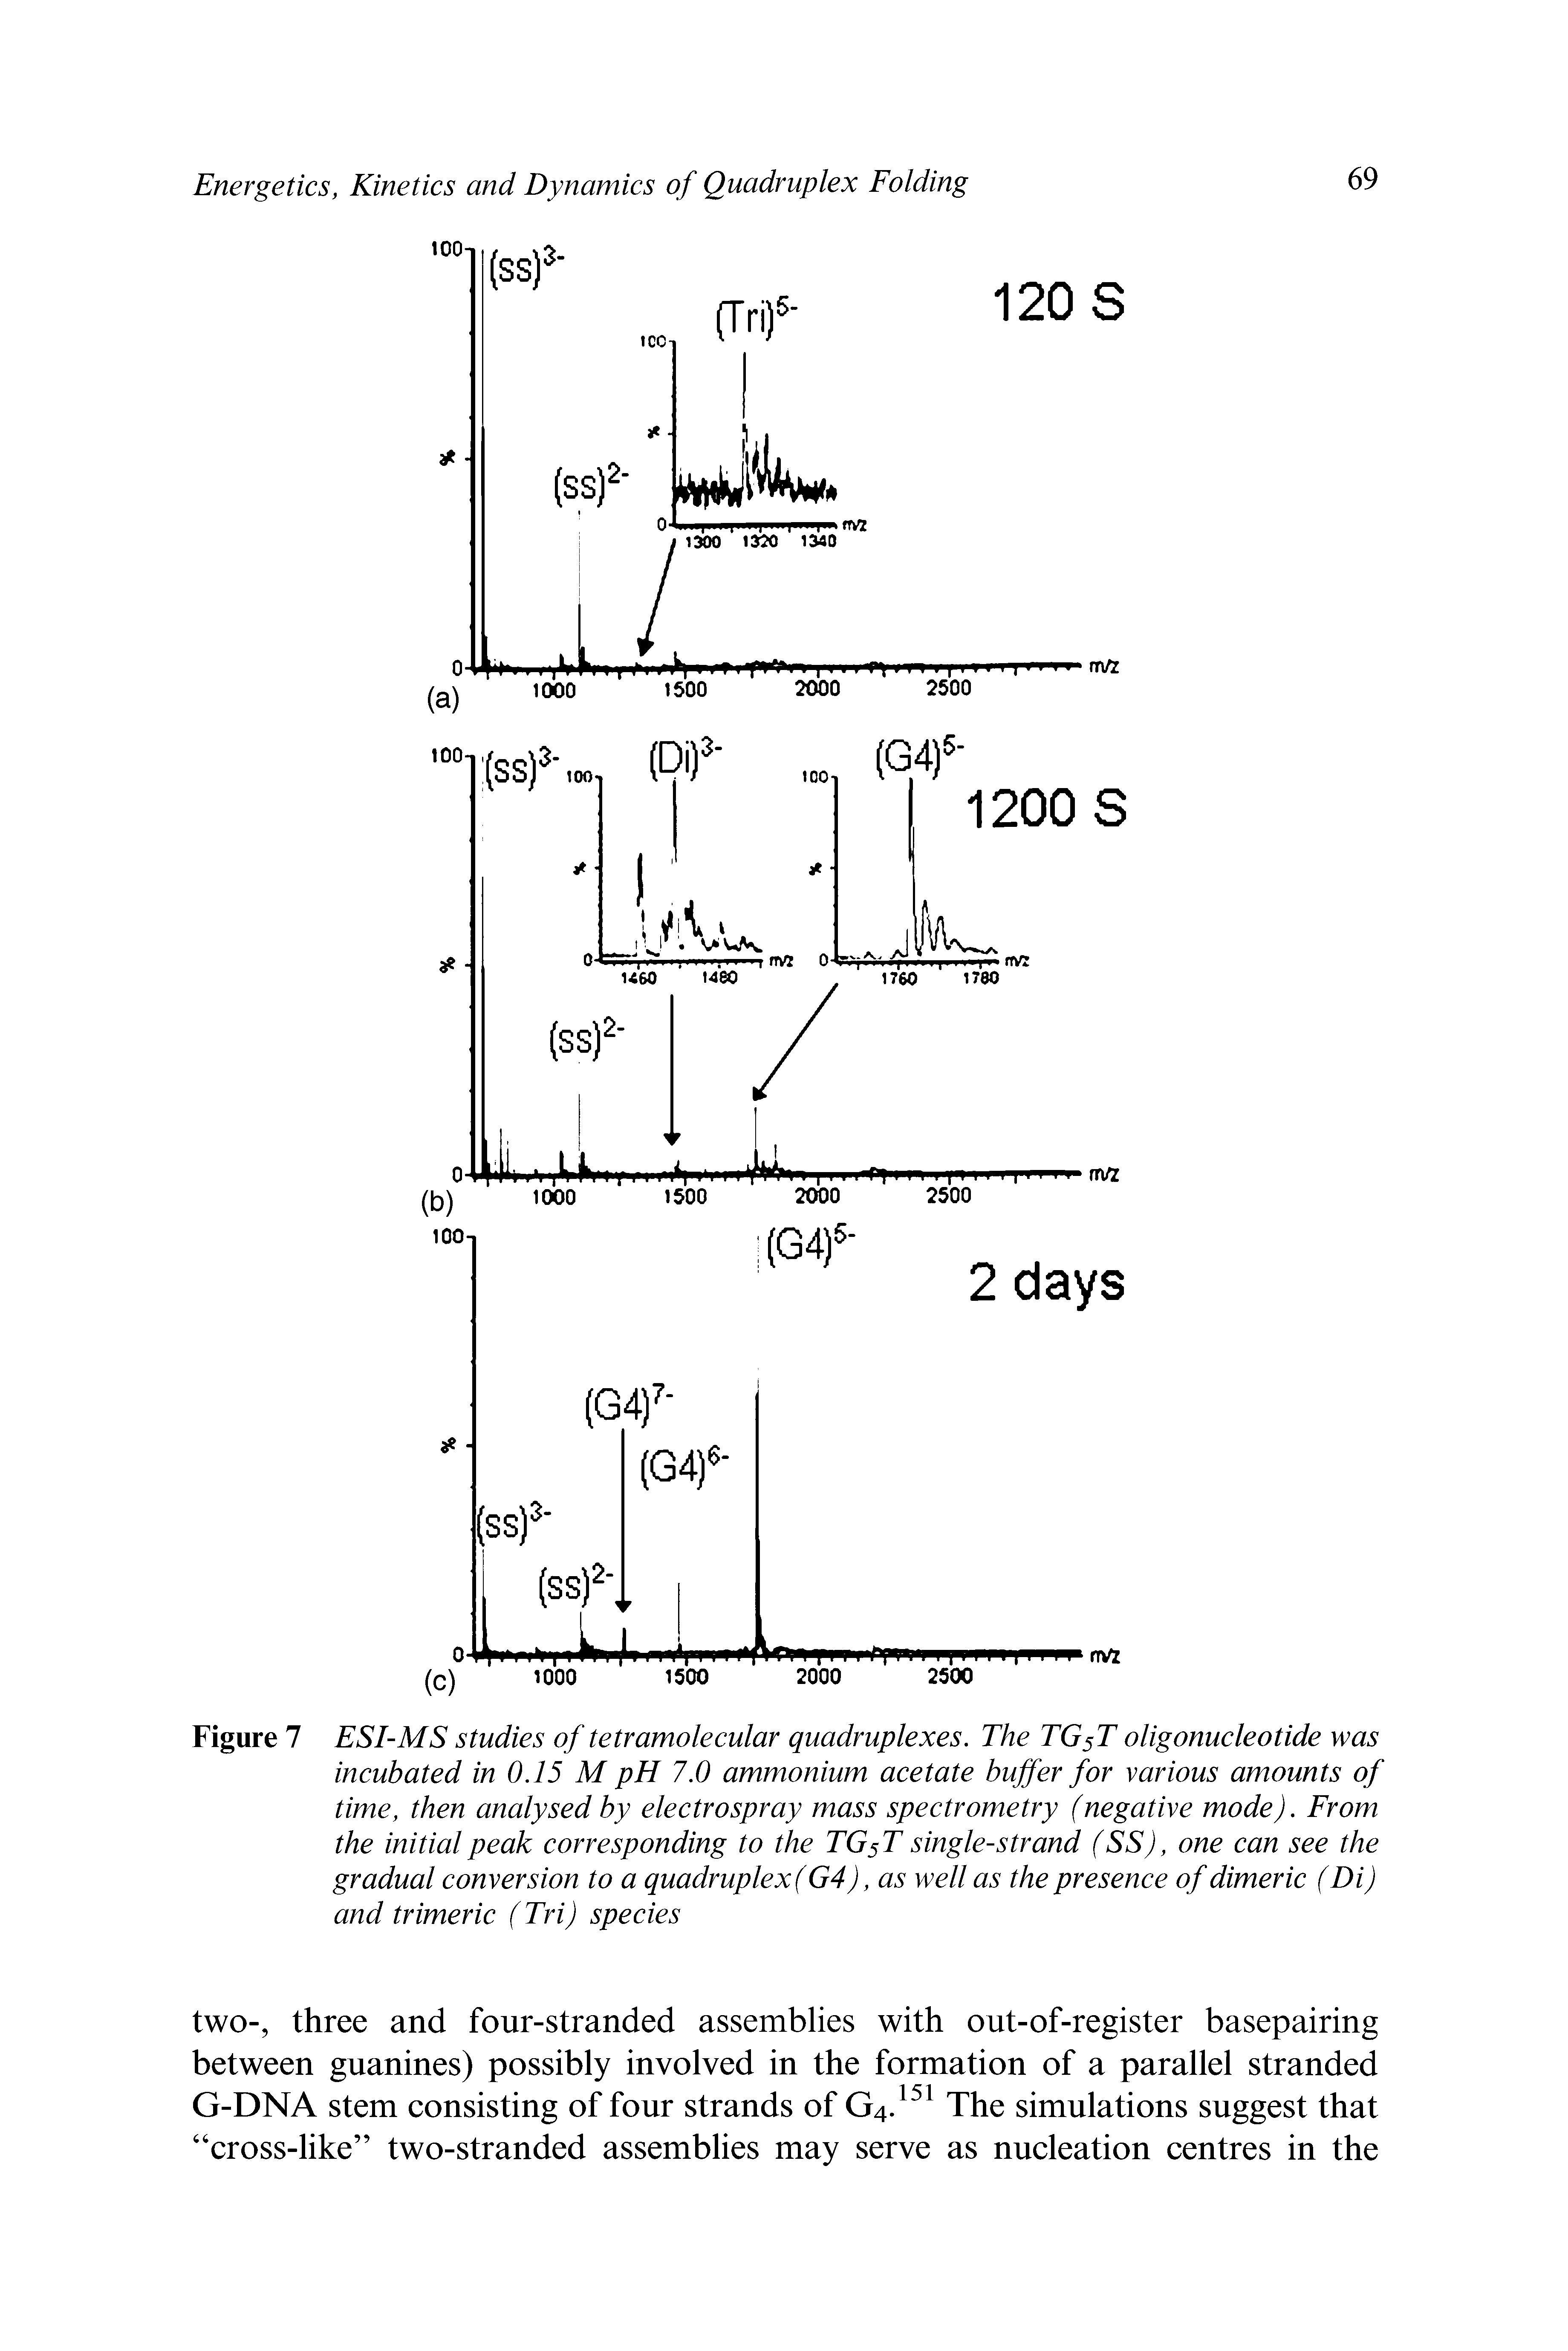 Figure 7 ESI-MS studies of tetramolecular quadruplexes. The TG5T oligonucleotide was incubated in 0.15 M pH 7.0 ammonium acetate buffer for various amounts of time, then analysed by electrospray mass spectrometry (negative mode). From the initial peak corresponding to the TG5T single-strand (SS), one can see the gradual conversion to a quadruplex (G4), as well as the presence of dimeric (Di) and trimeric (Tri) species...